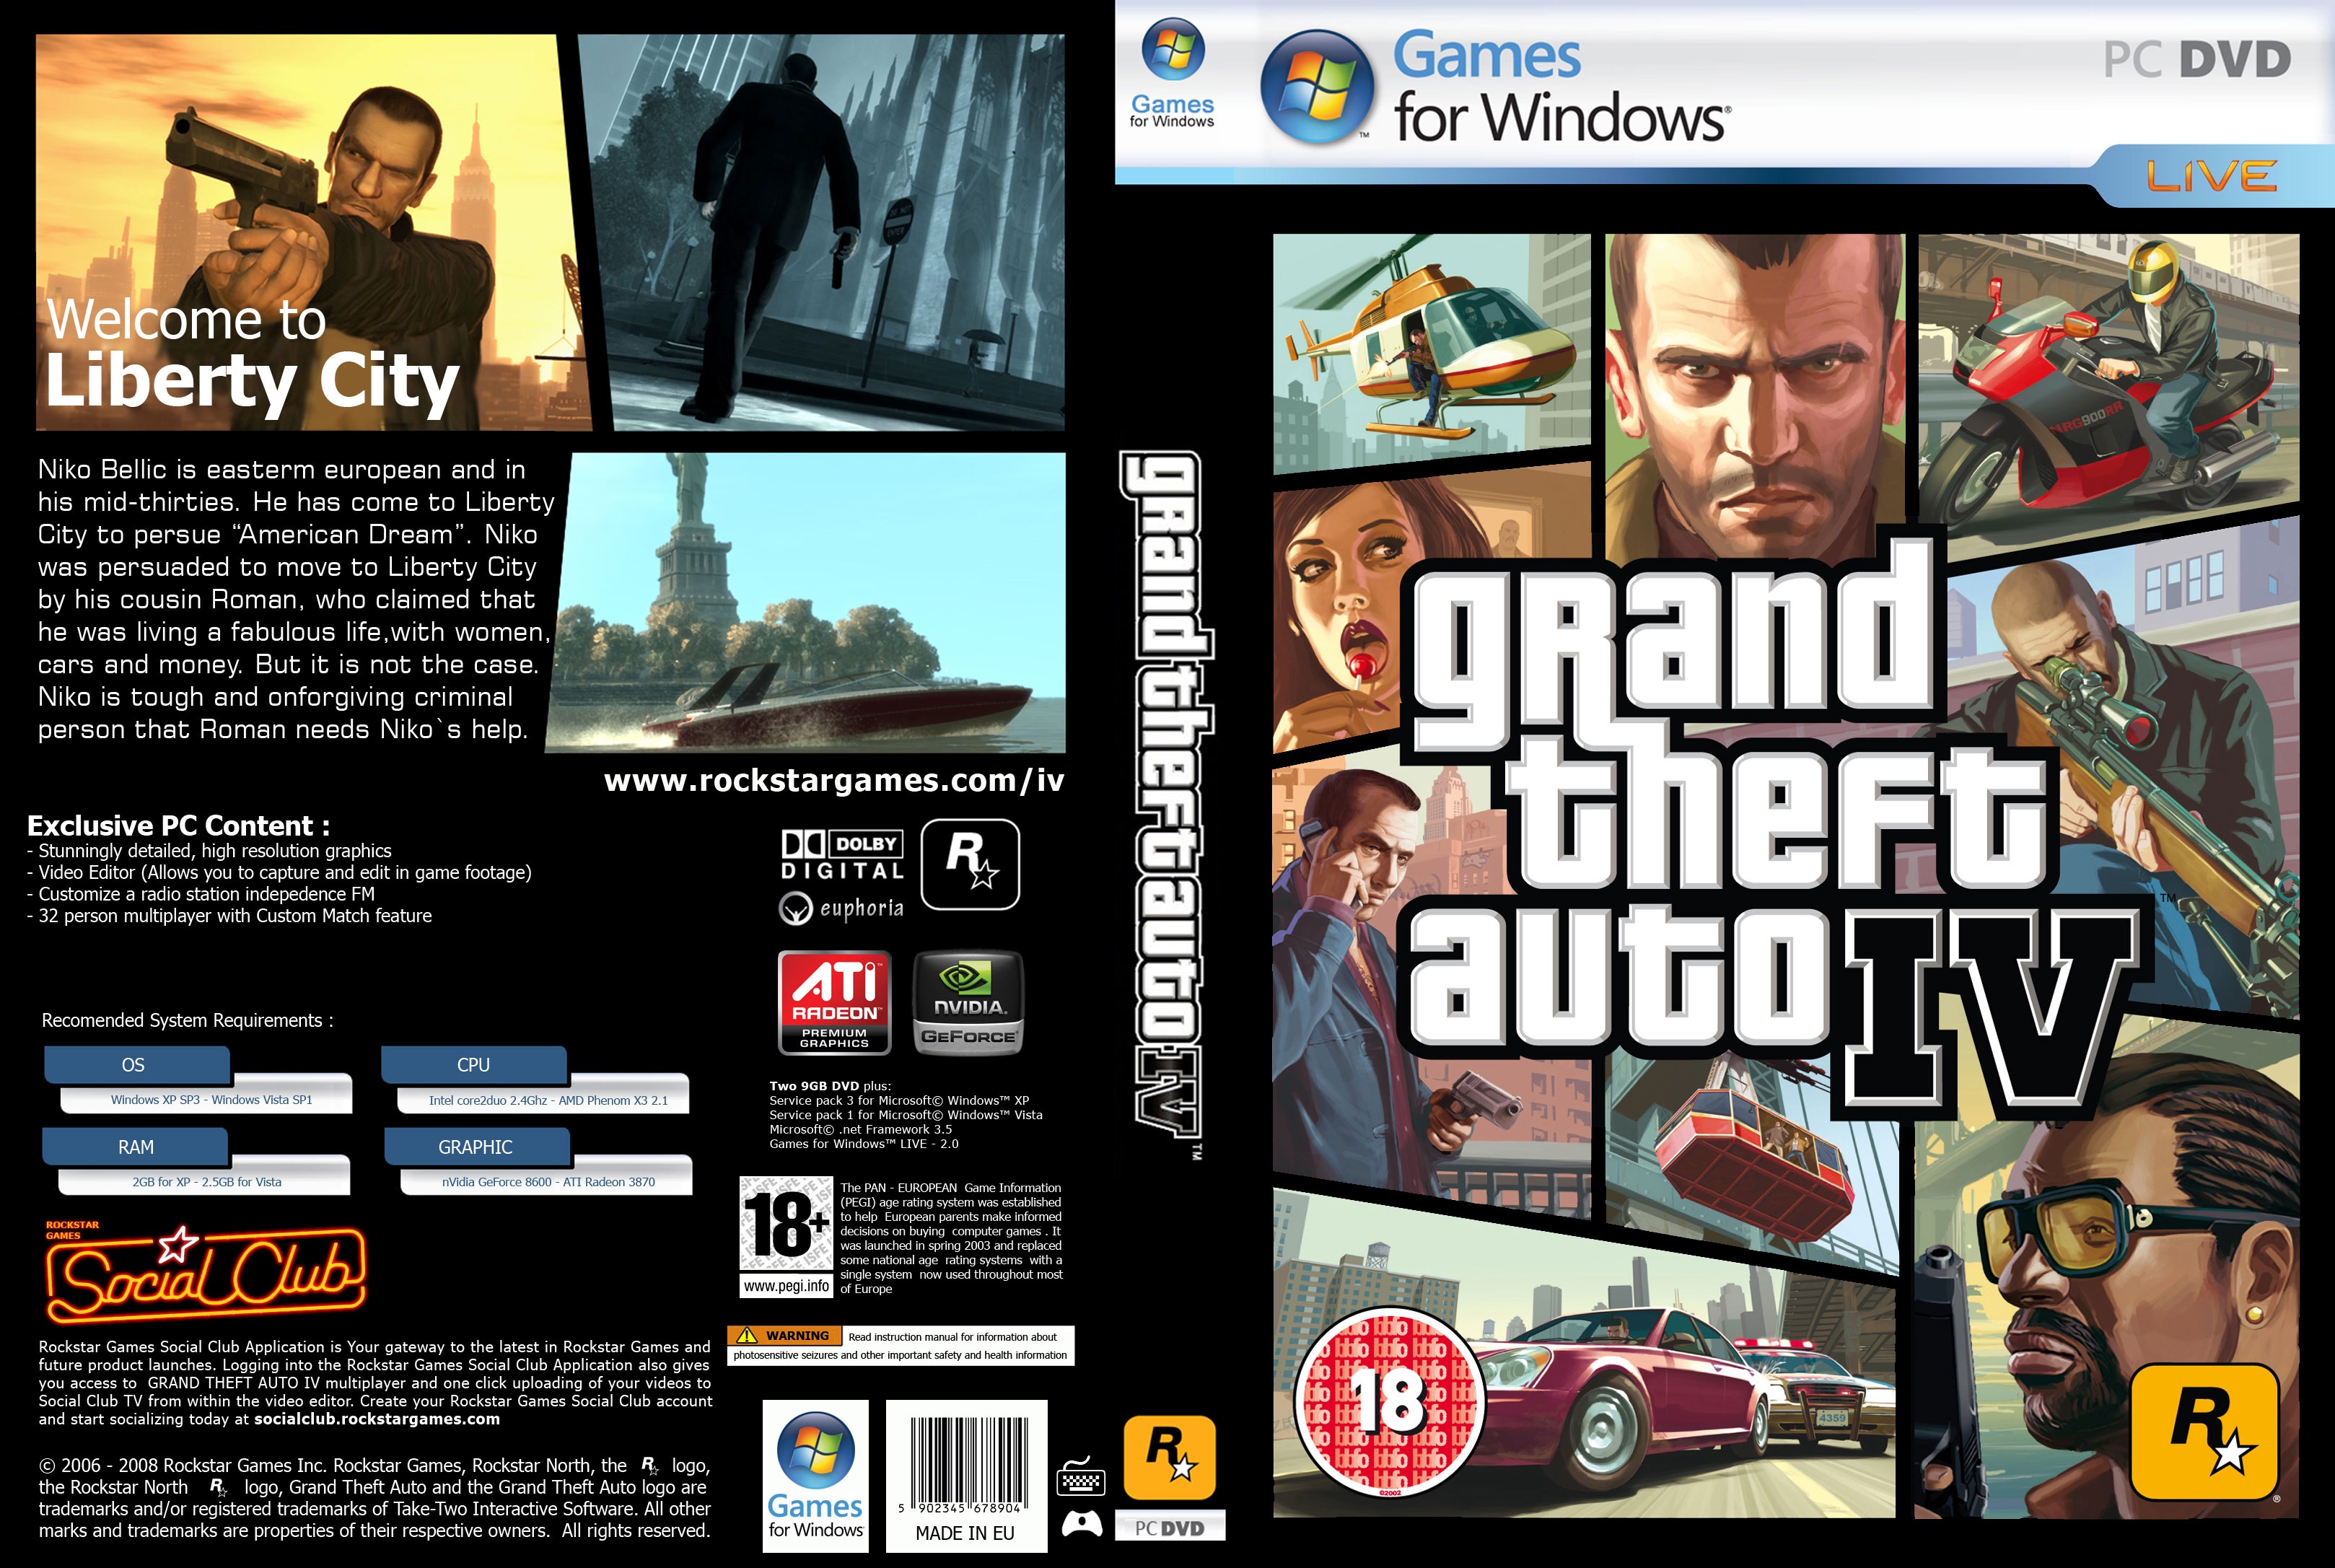 GTA IV: PC game of the year edition box cover